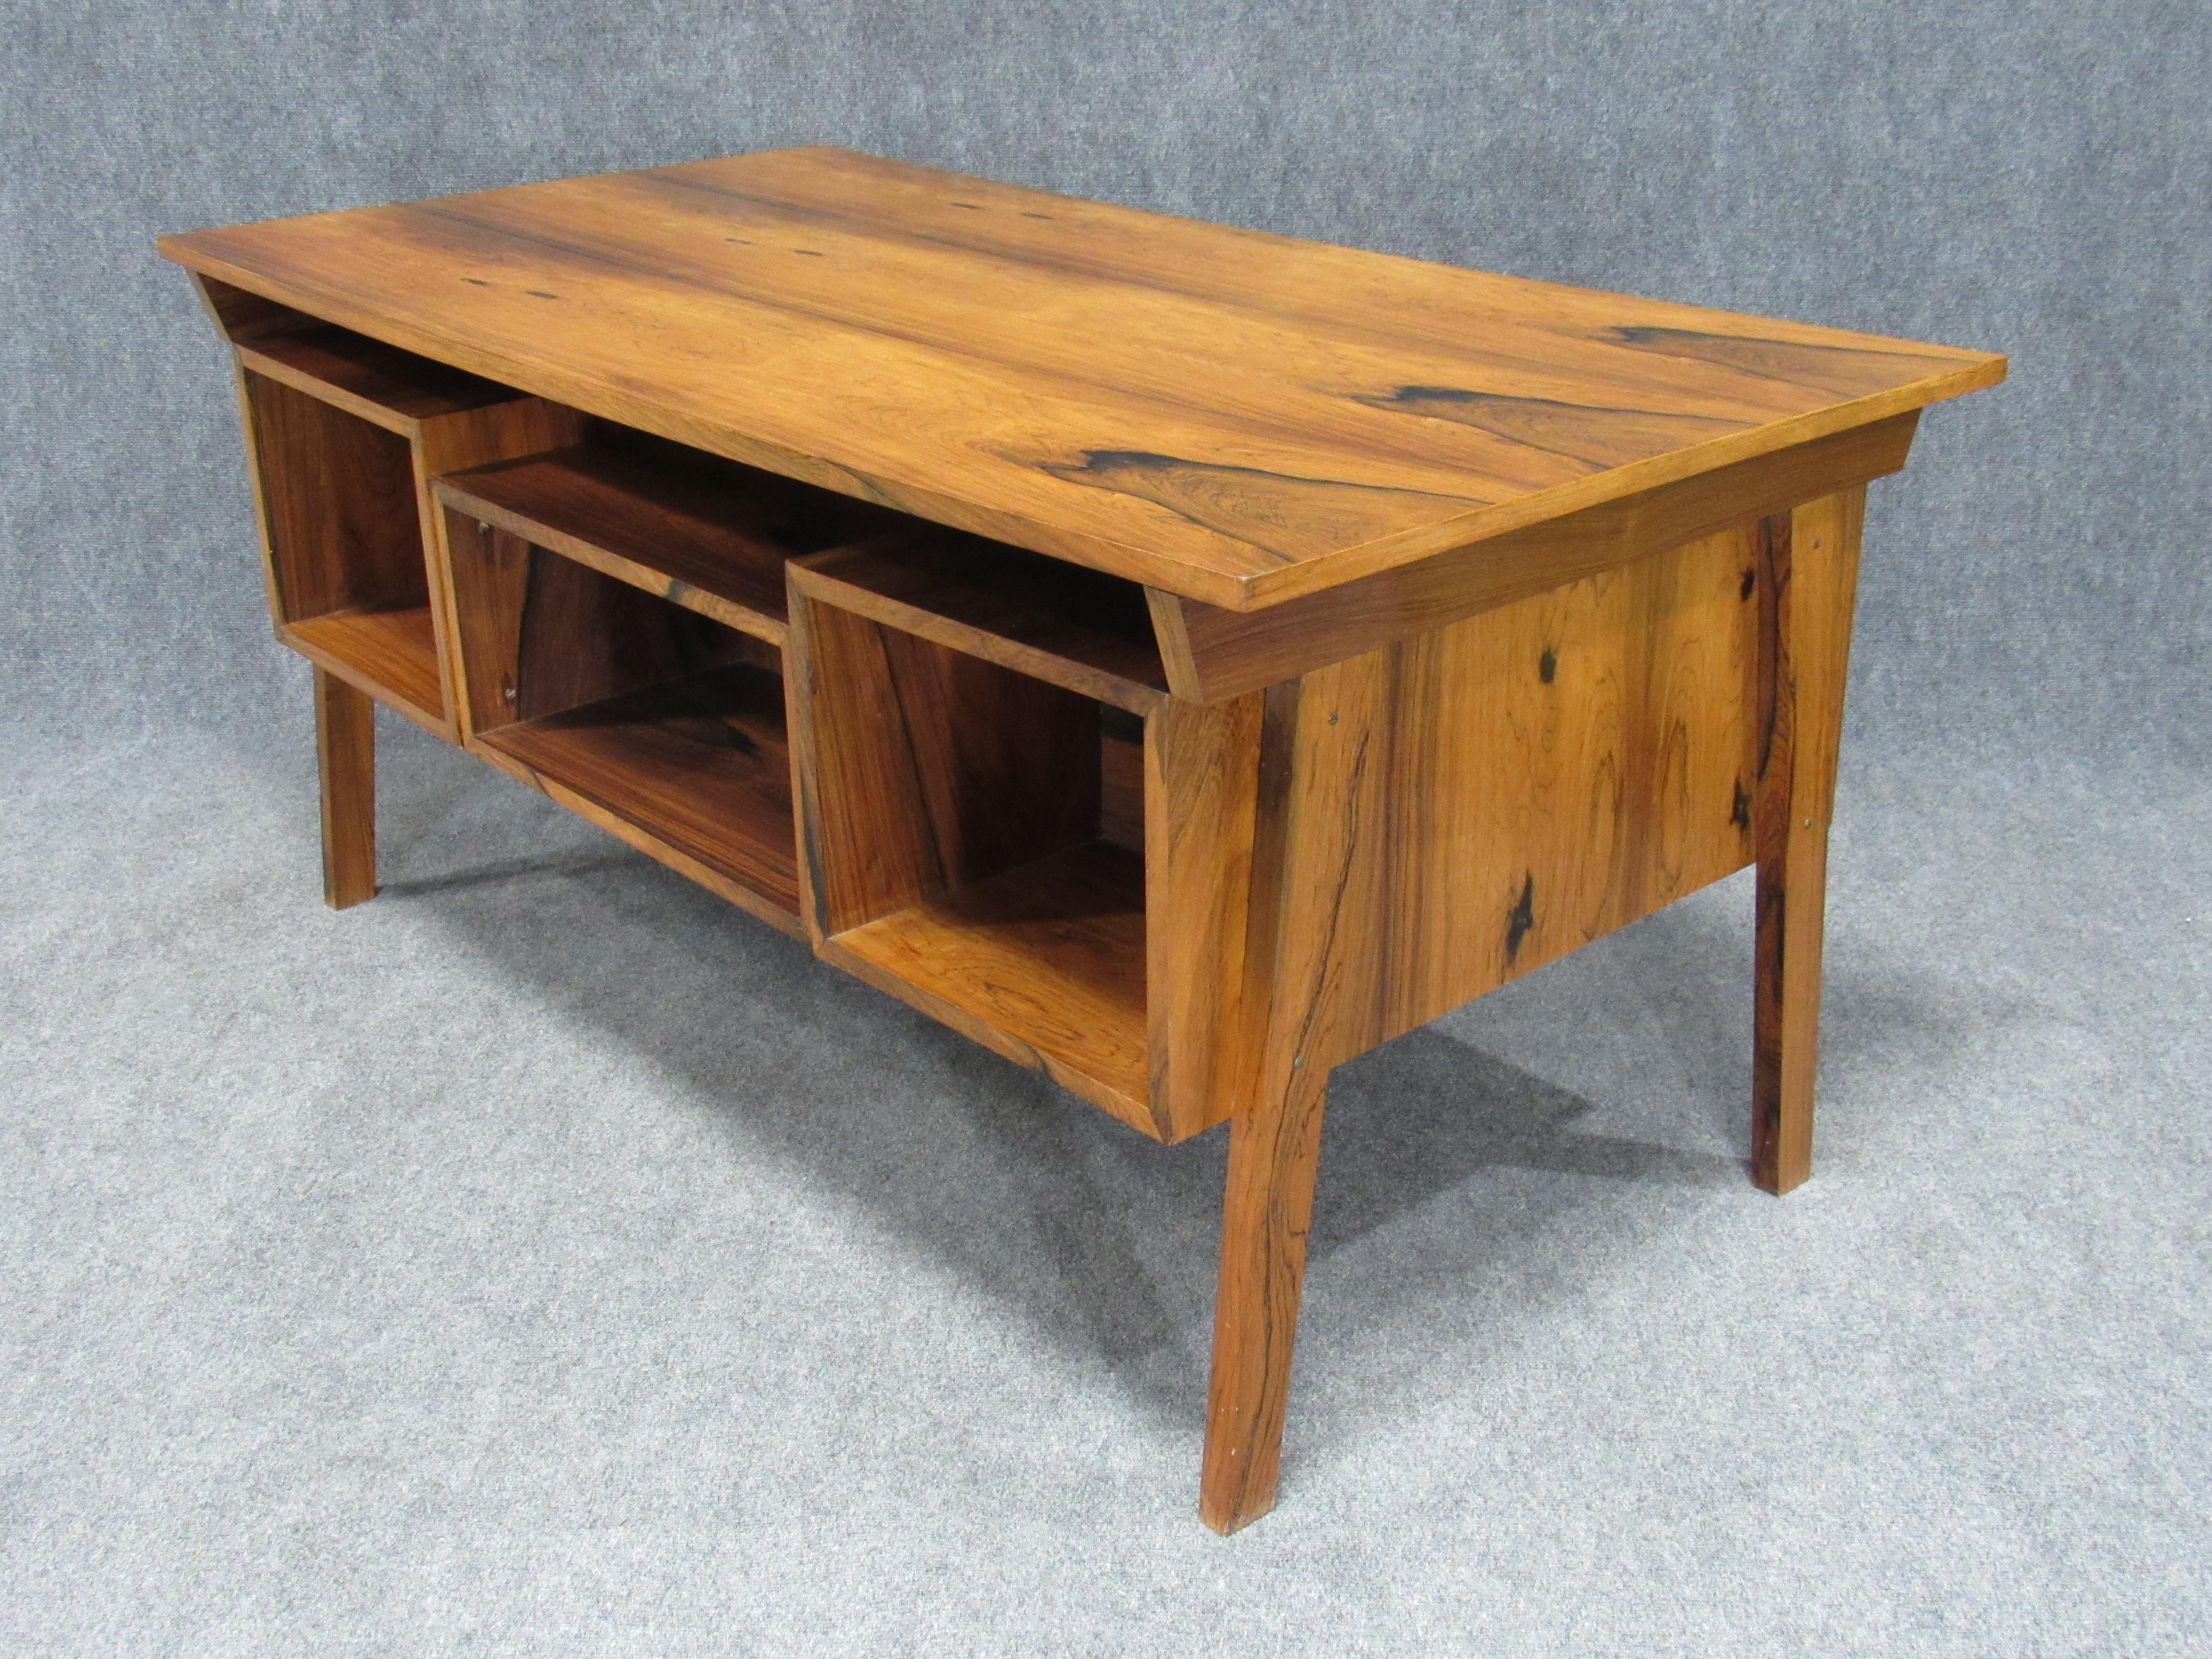 Midcentury Danish Modern Desk Crafted in Dramatically Figured Rosewood 1